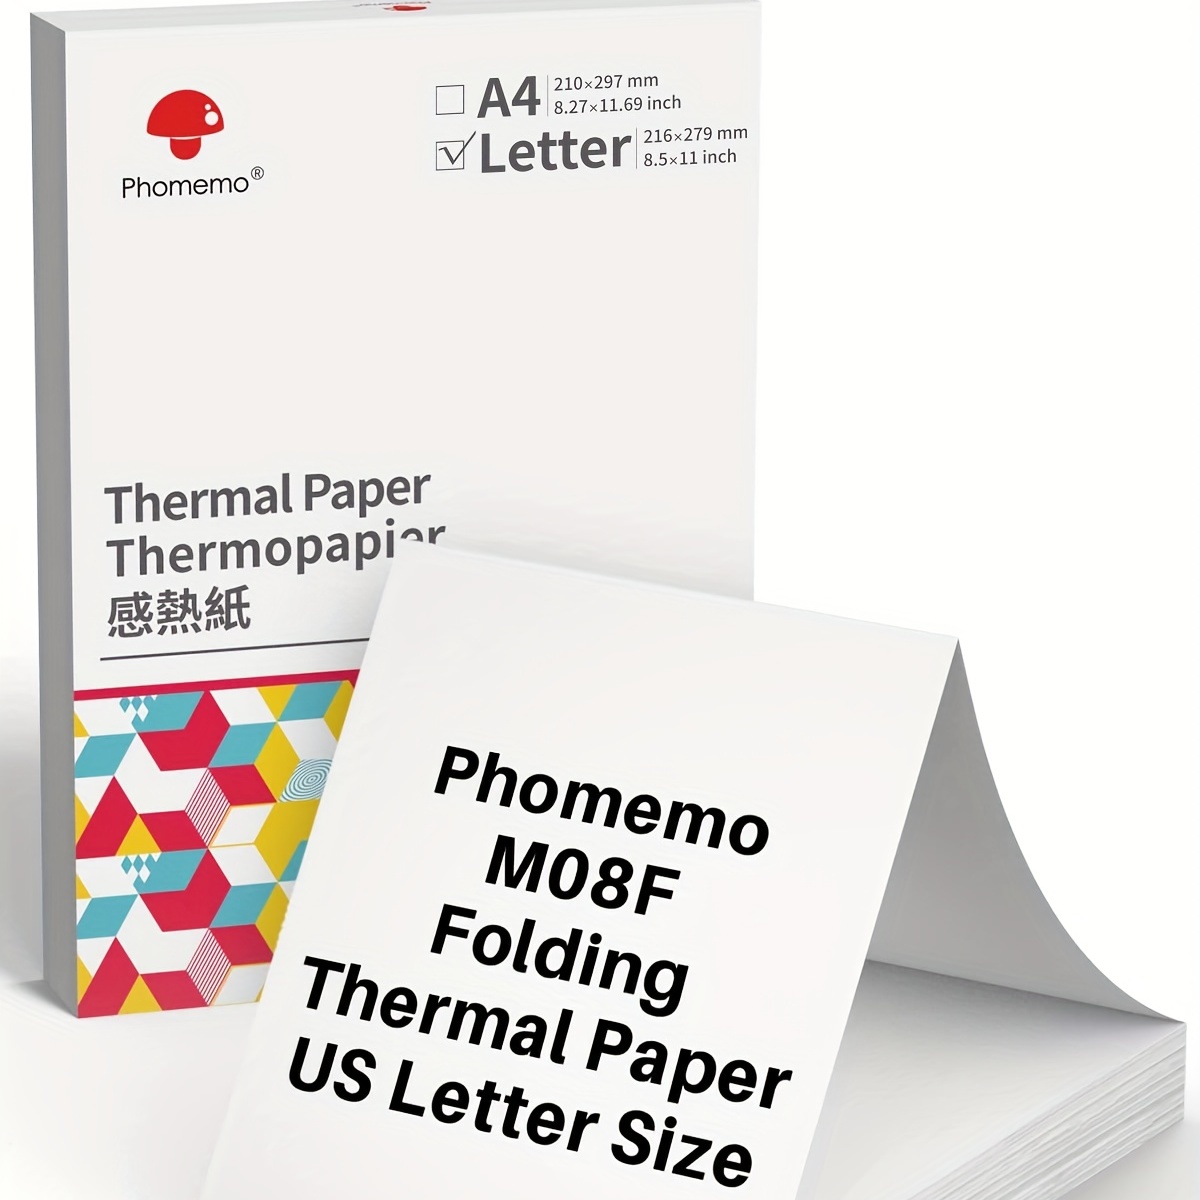  Phomemo Thermal Paper 8.5 x 11 Inch, Folding Thermal